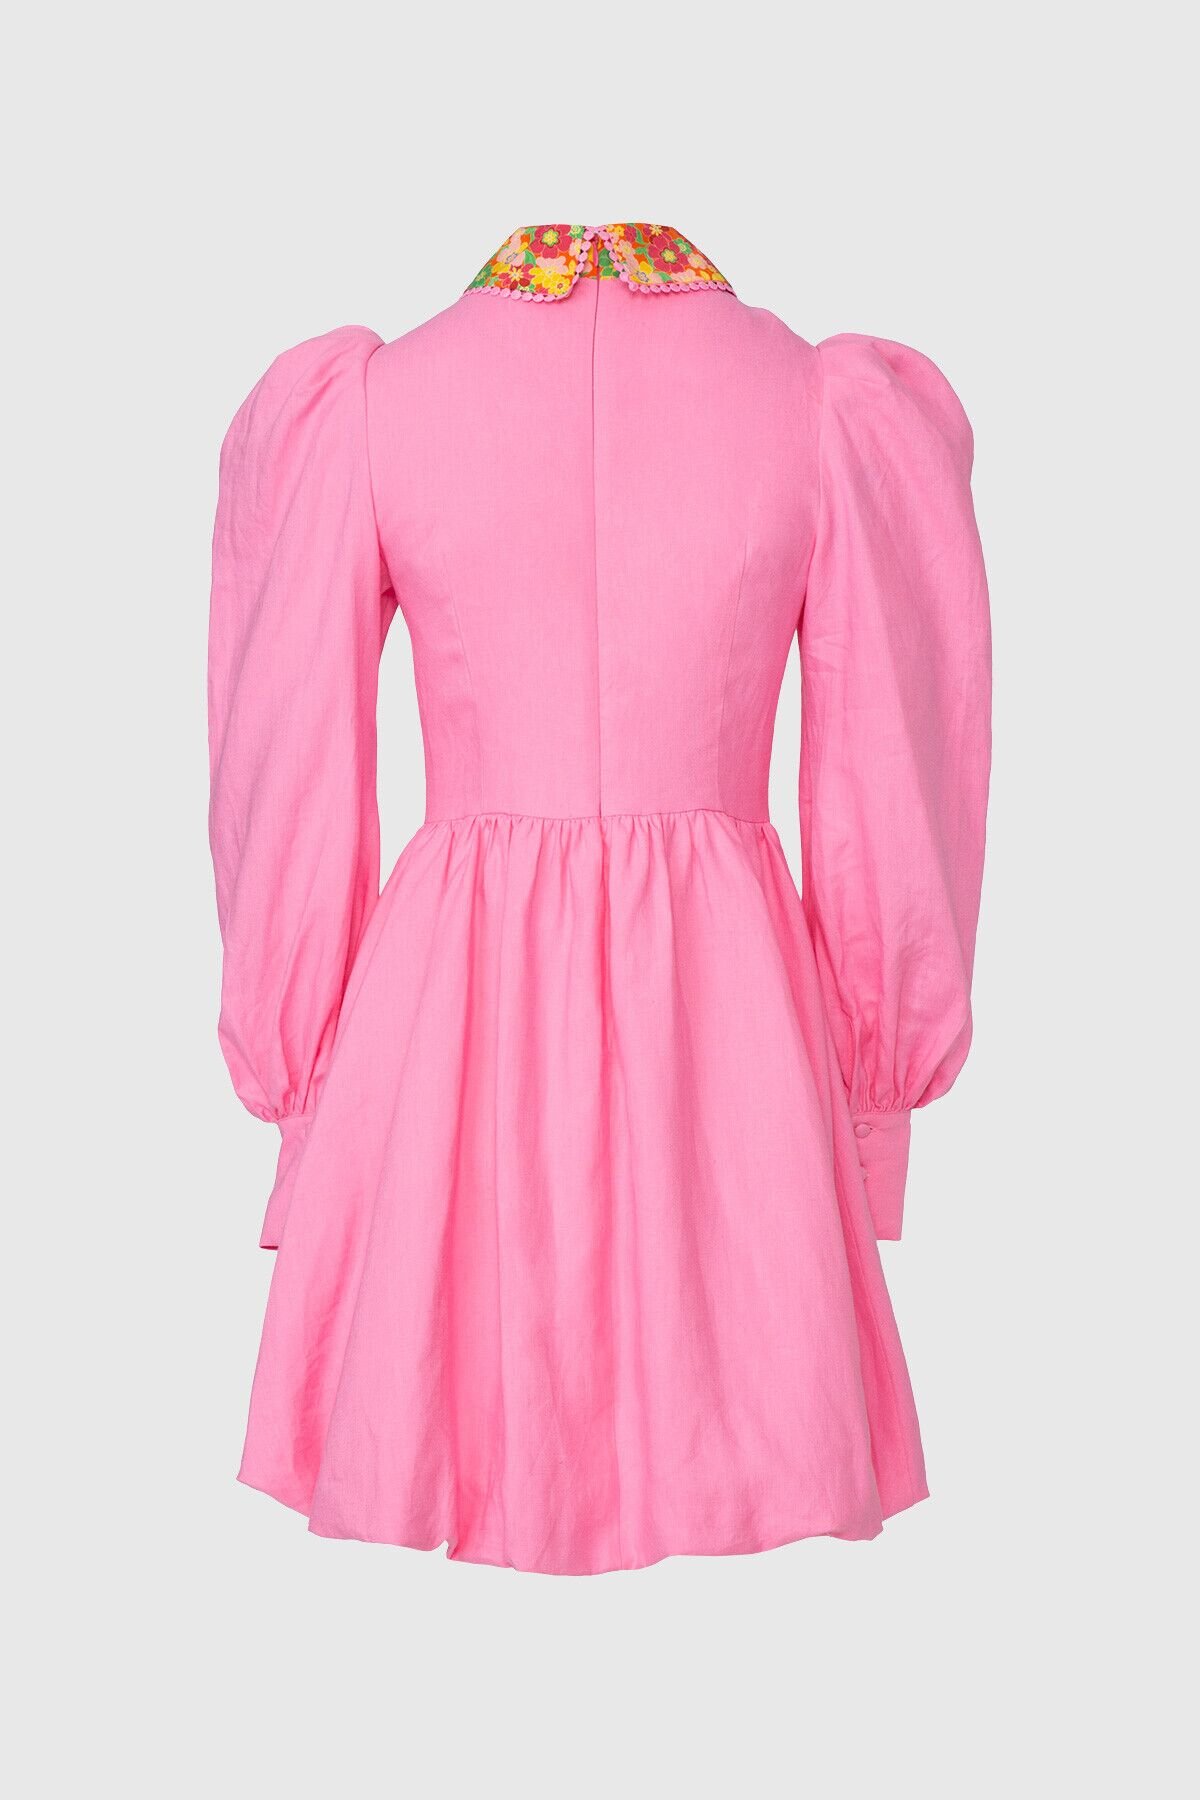 Pink Dress With Pattern Embroidered Collar